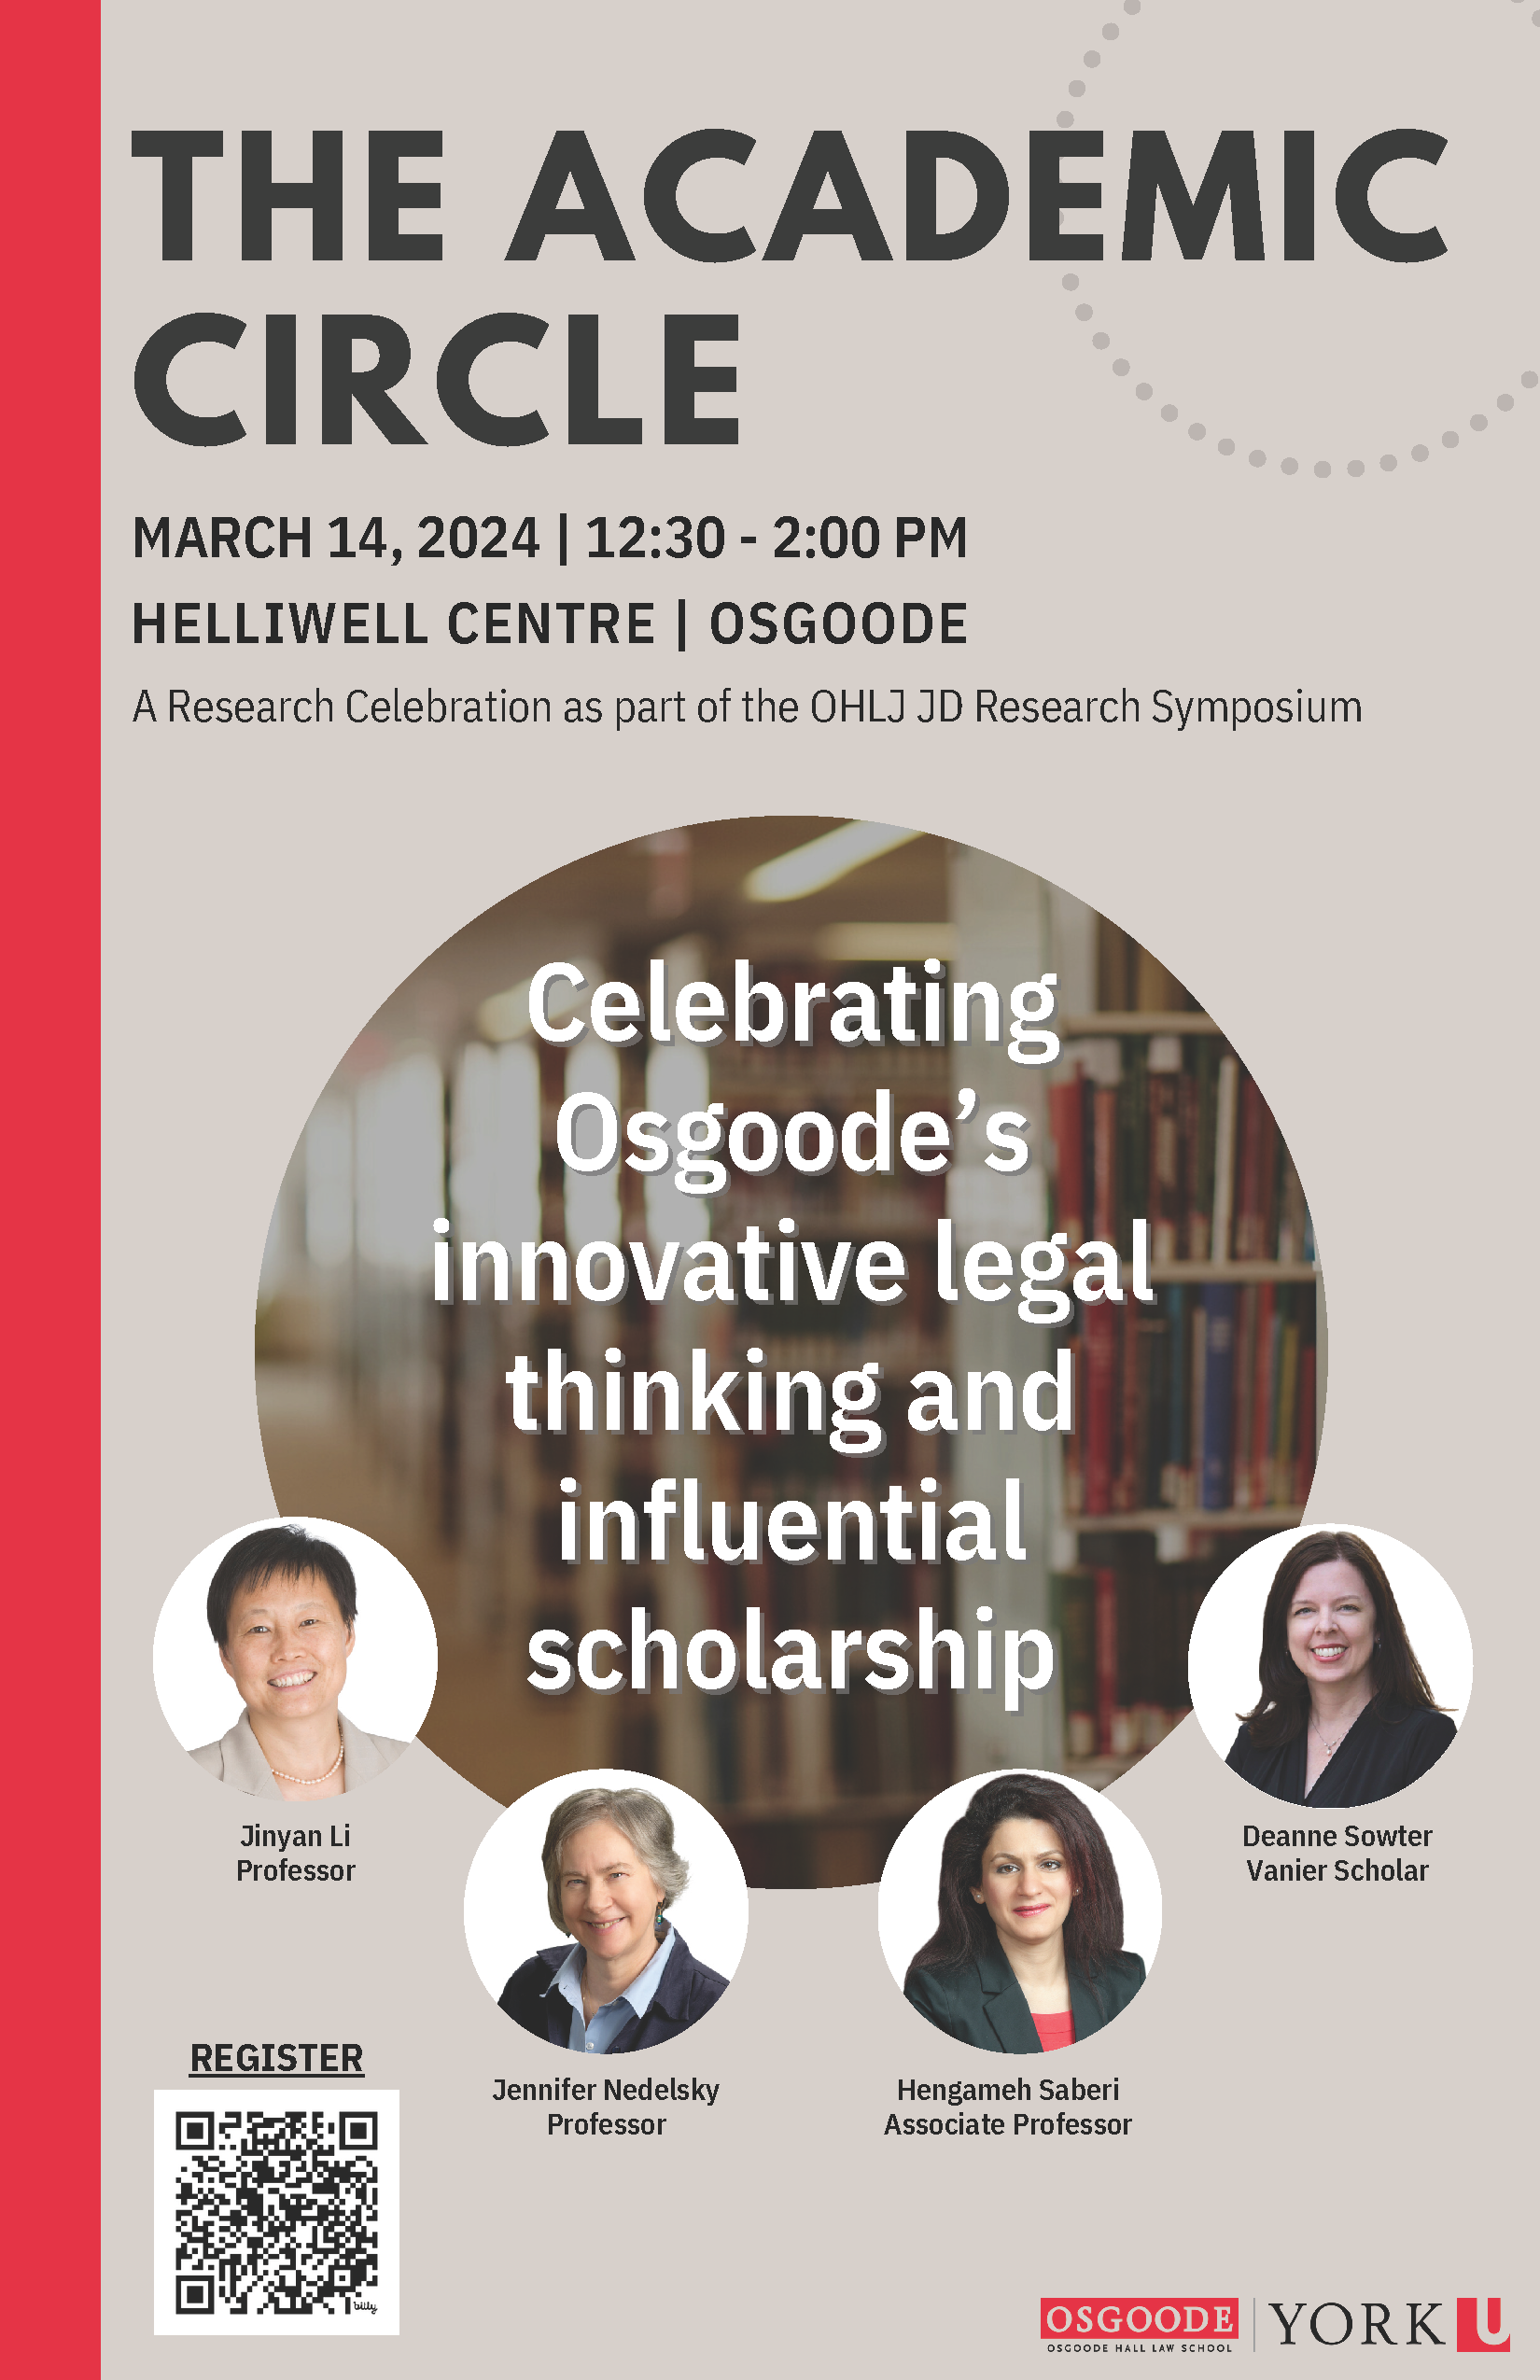 The Academic Circle: A Research Celebration as part of the OHLJ JD Research Symposium